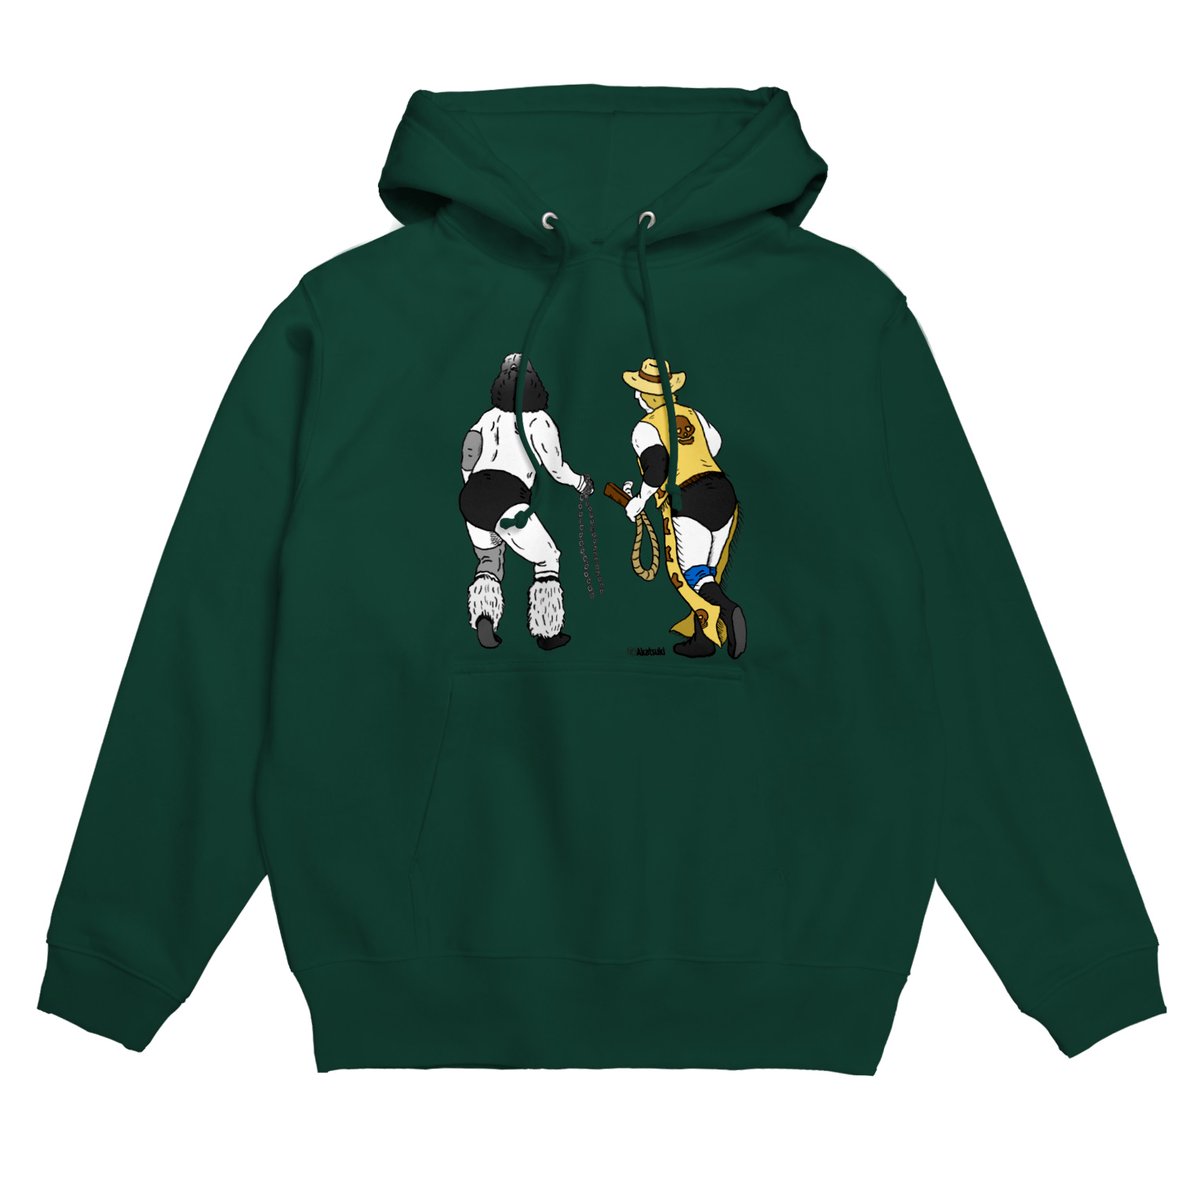 hood white background hoodie simple background green jacket multiple boys chain  illustration images